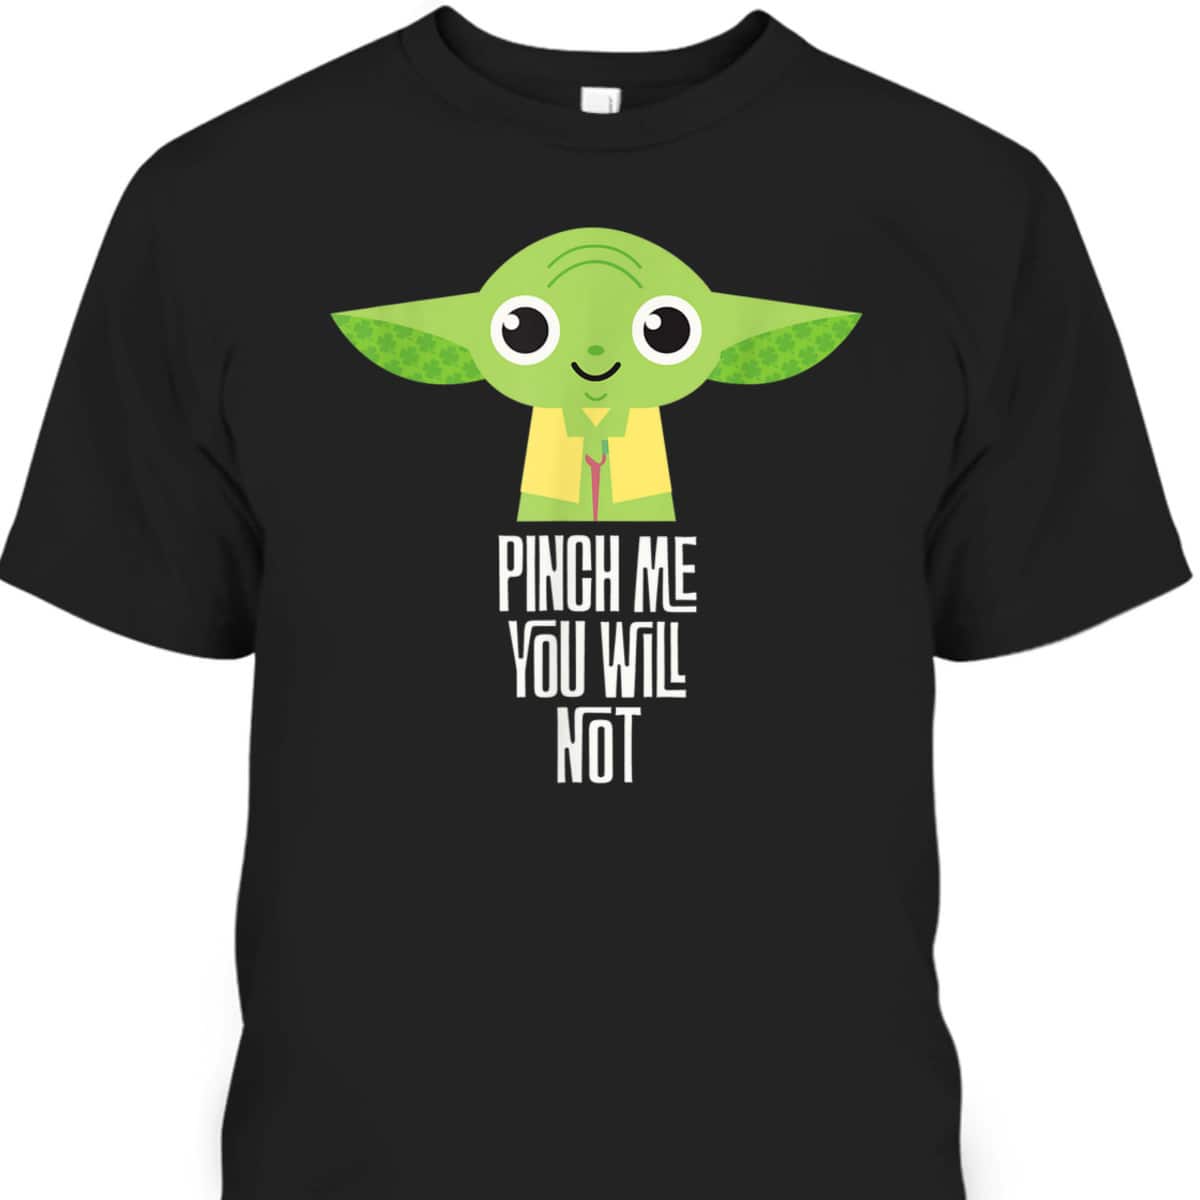 Star Wars Yoda Pinch Me You Will Not St Patrick's Day T-Shirt